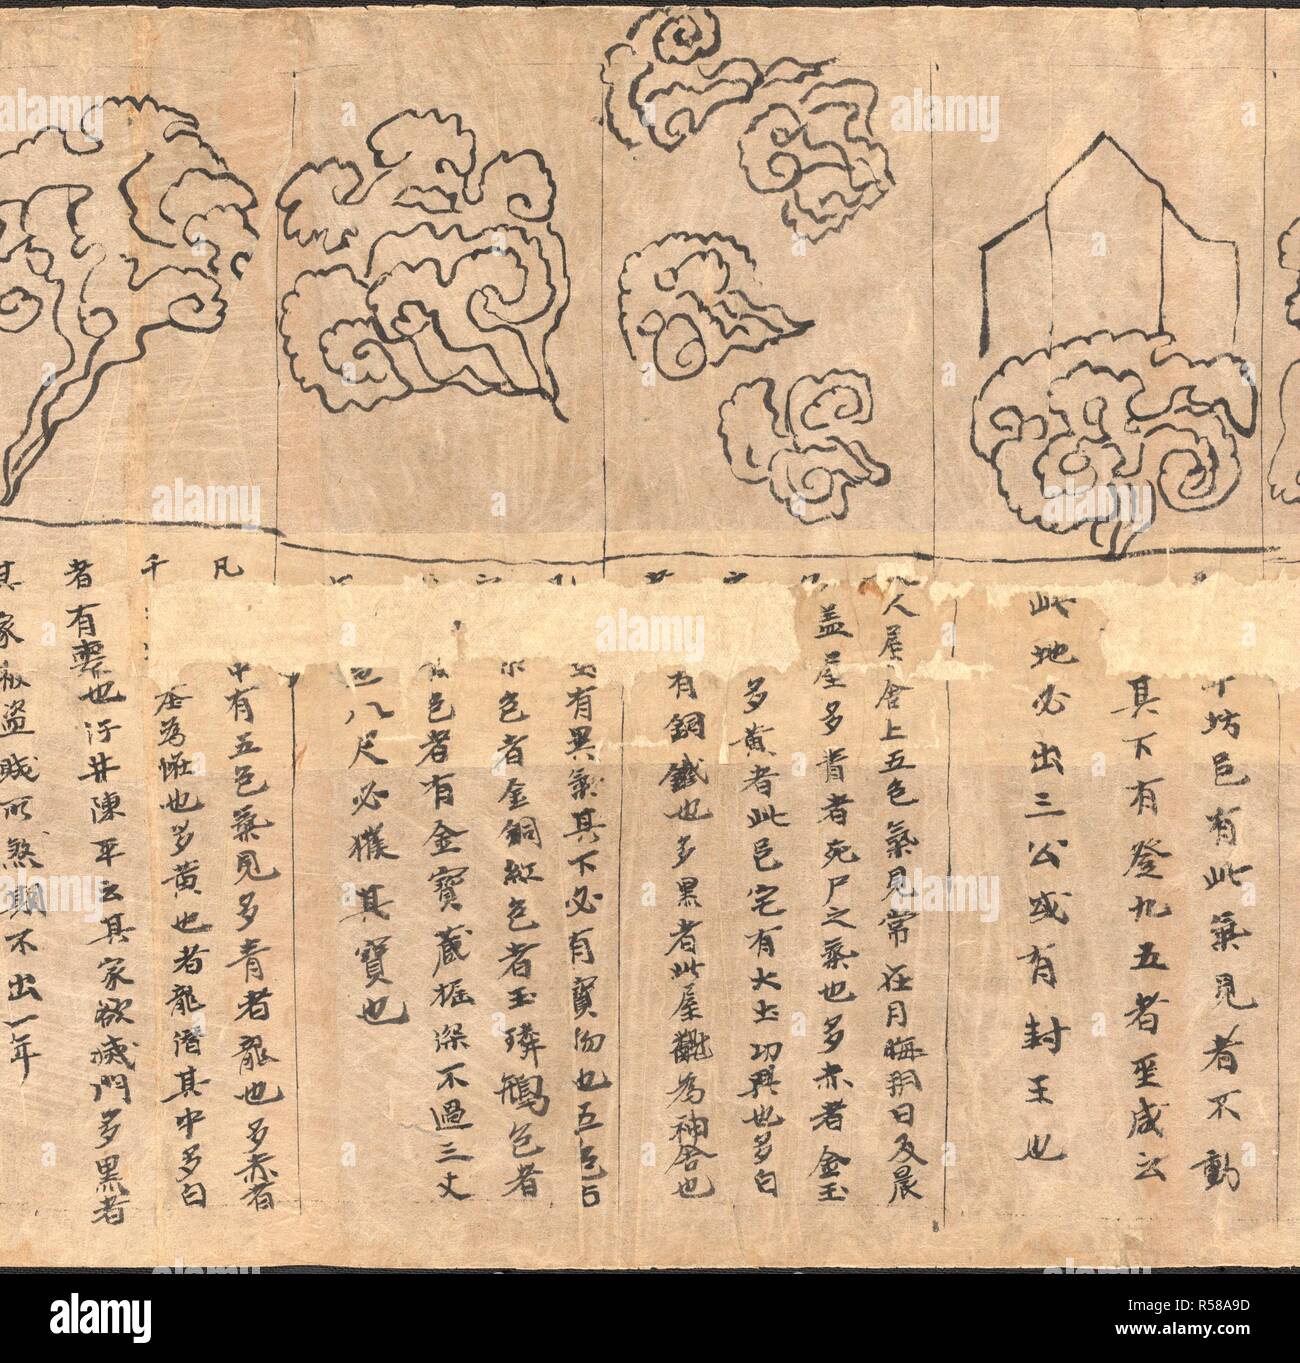 Chinese Scroll Map Depicting The Night Sky Seen From Northern Hemisphere It Is Divided According To The Stations Of The Planet Jupiter Into 12 Sections Star Maps From Dunhuang China Tang Dynasty